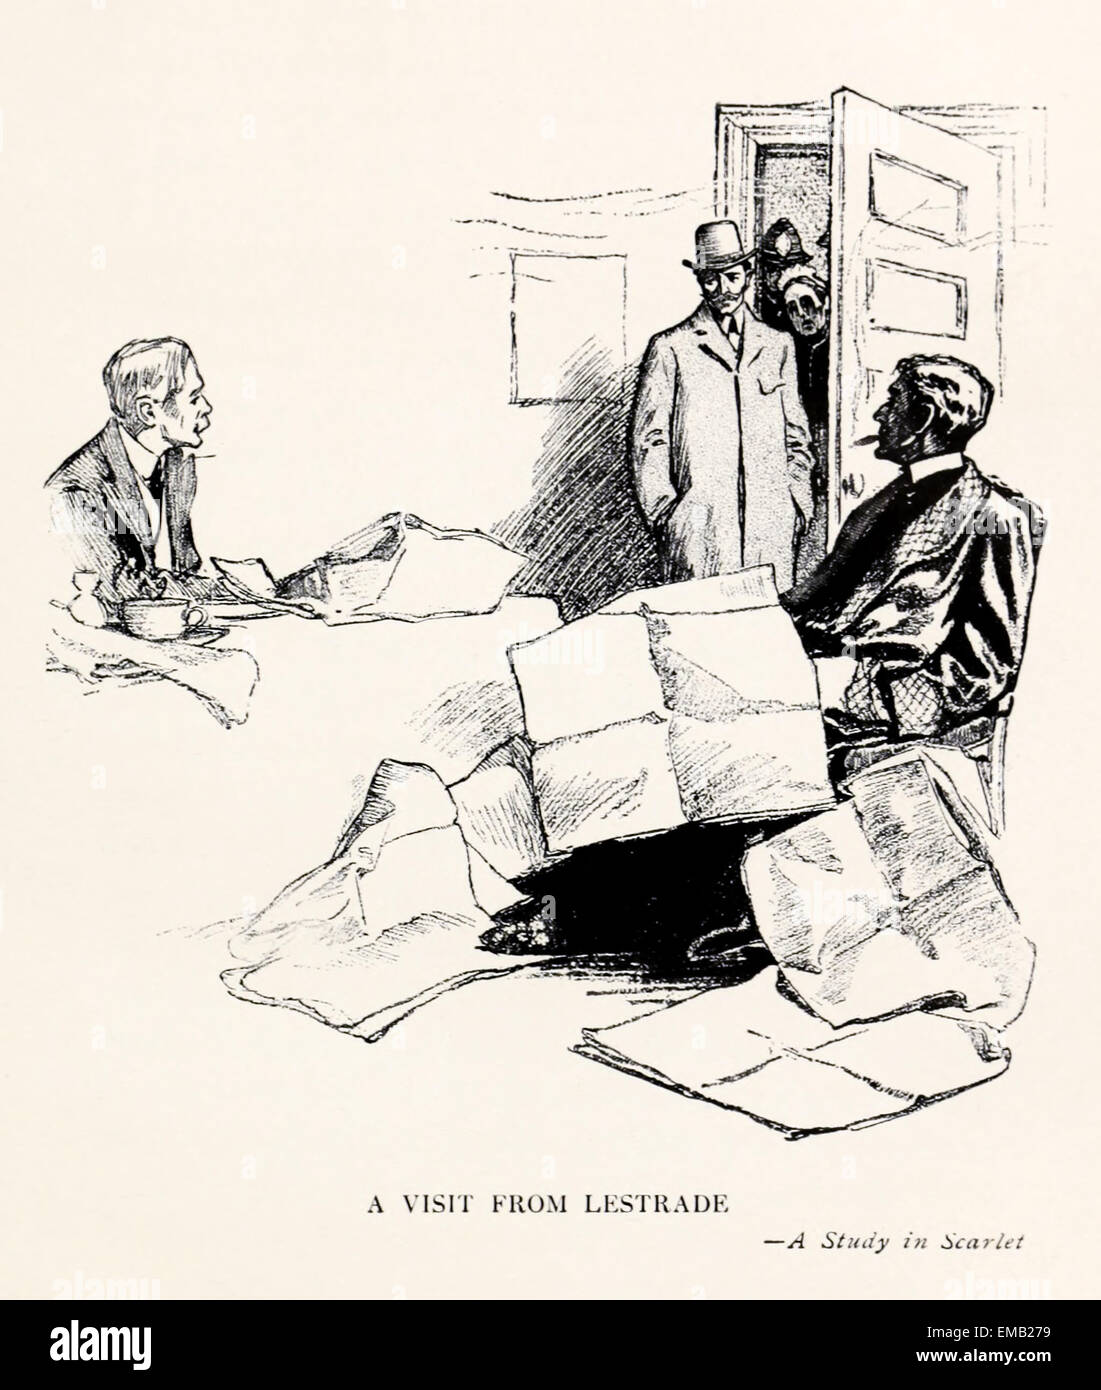 A visit from Lestrade - Illustration by Frederic Dorr Steele (1873-1944), from 1904 compilation 'Conan Doyle's Best Books' Volume 1, 'A Study in Scarlet'. See description for more information. Stock Photo